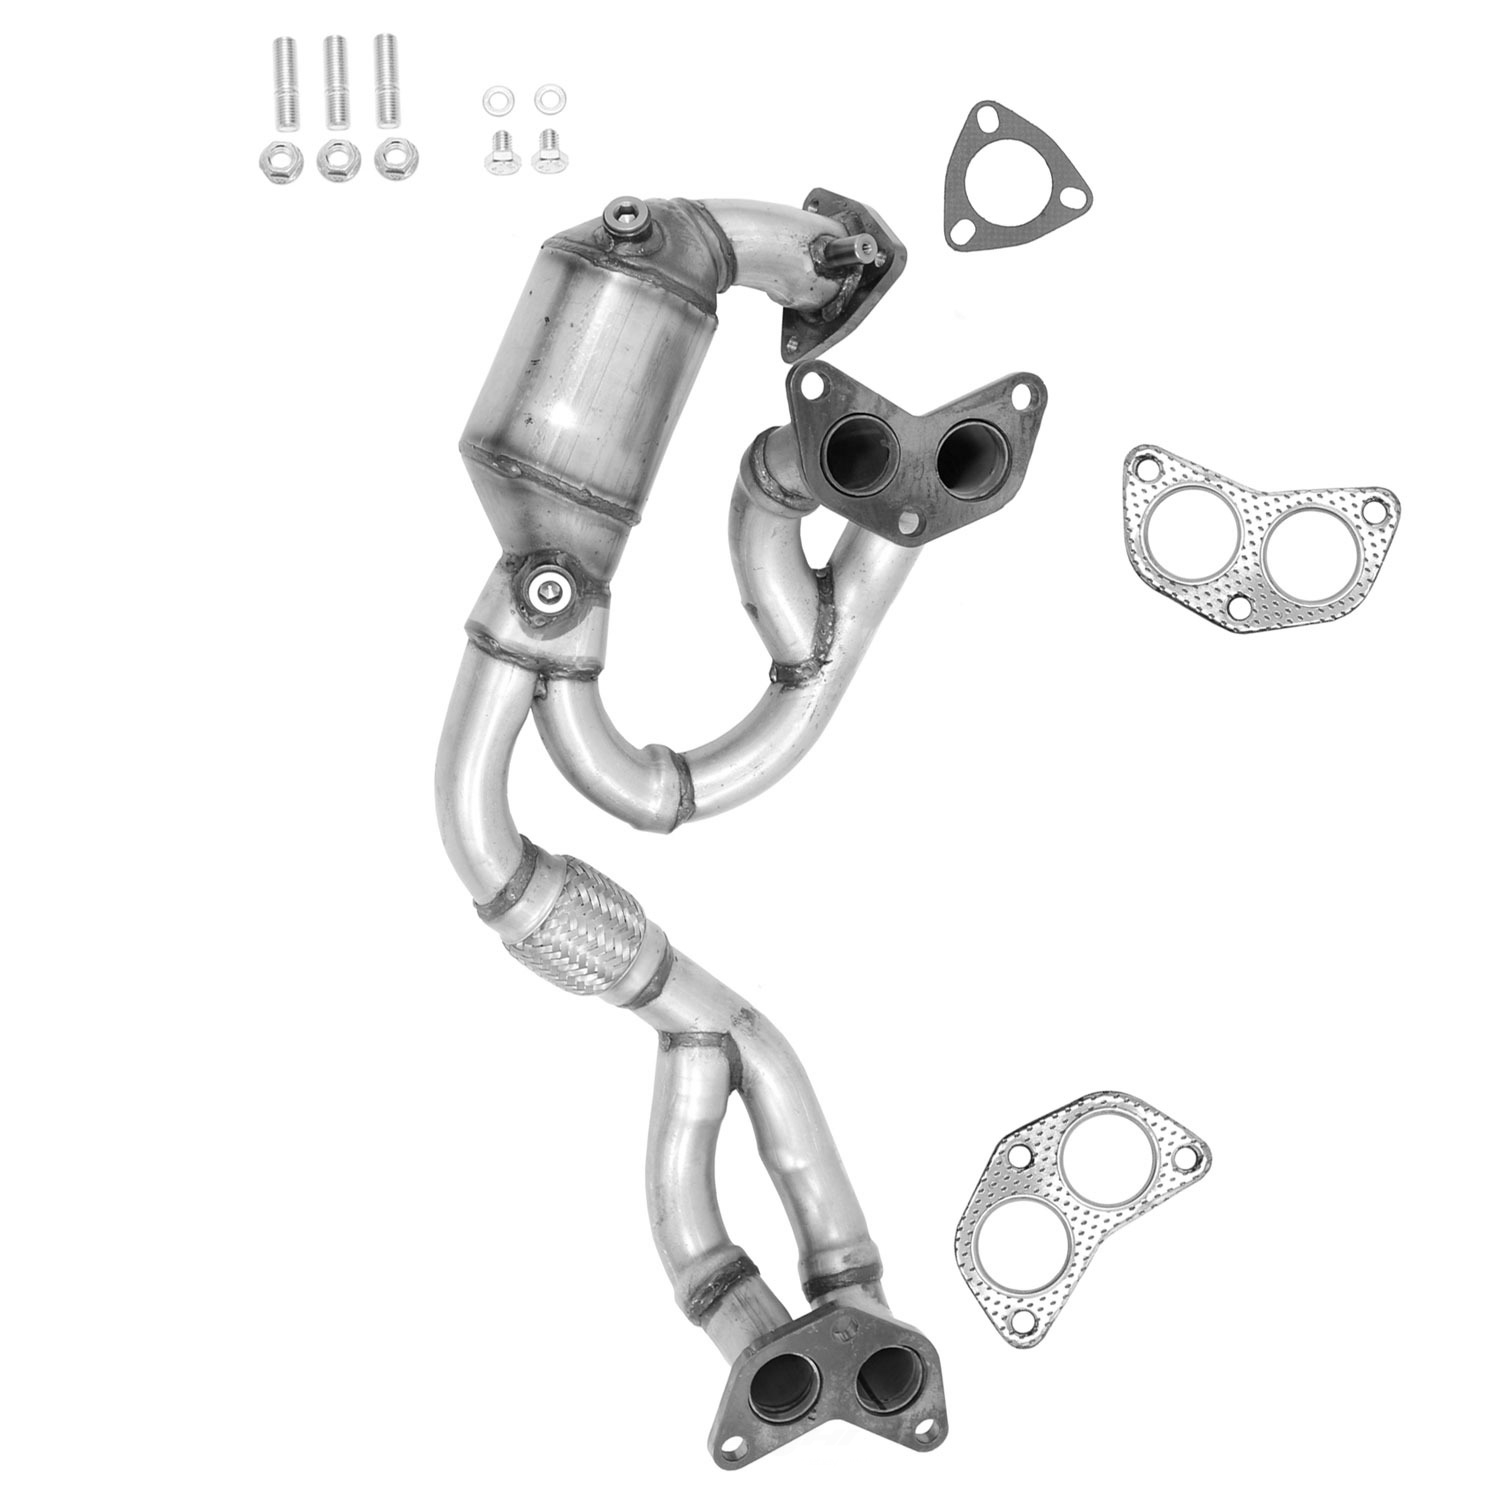 AP EXHAUST FEDERAL CONVERTER - Direct Fit Converter (Front) - APG 644079